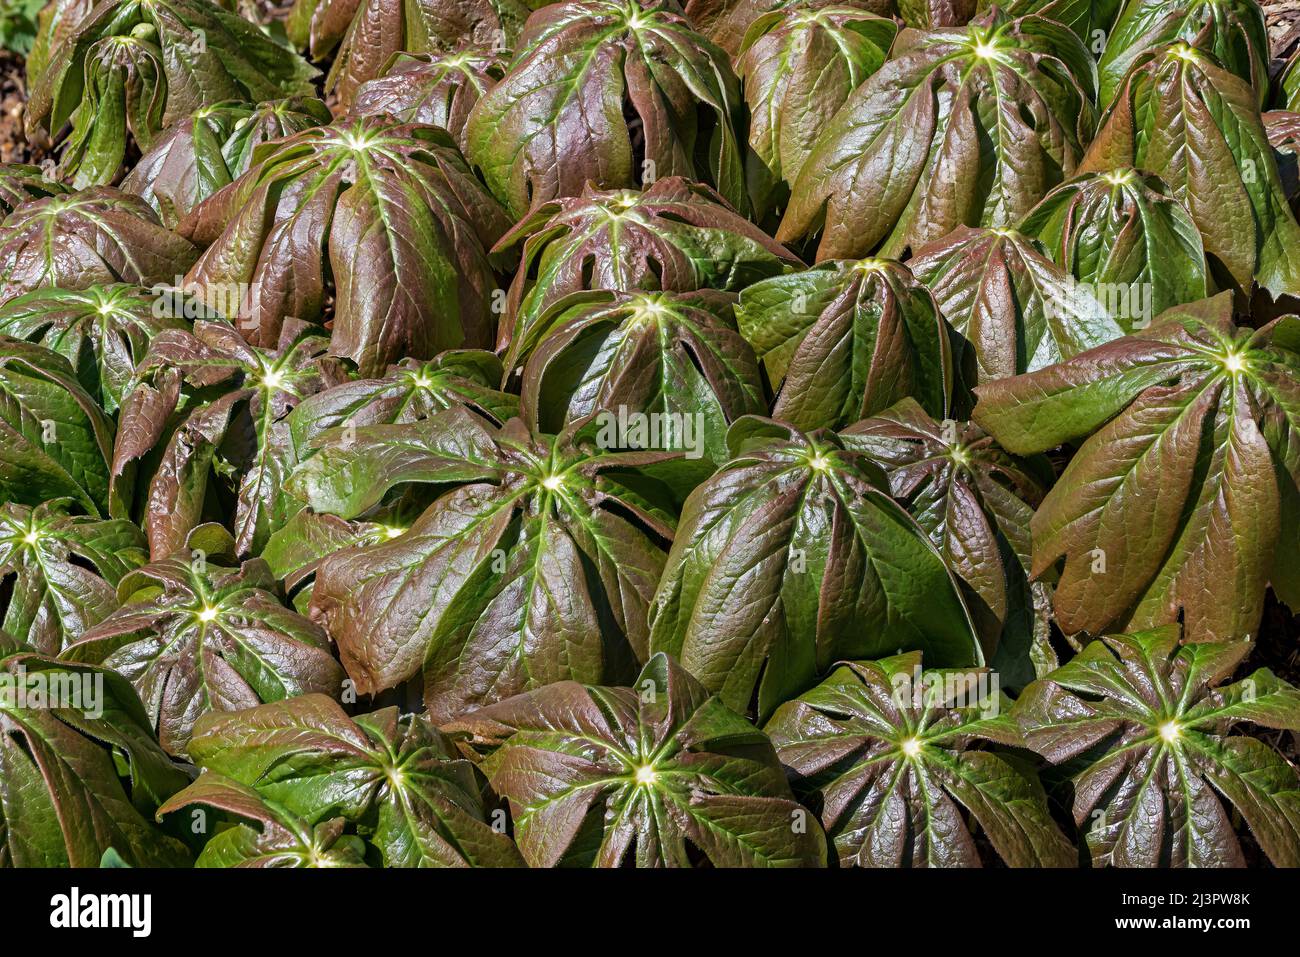 Cluster of Mayapples on a bright sunny day.  Also known as Podophyllum it is an herbaceous perennial. The rhizome, foliage and root are poisonous. Stock Photo